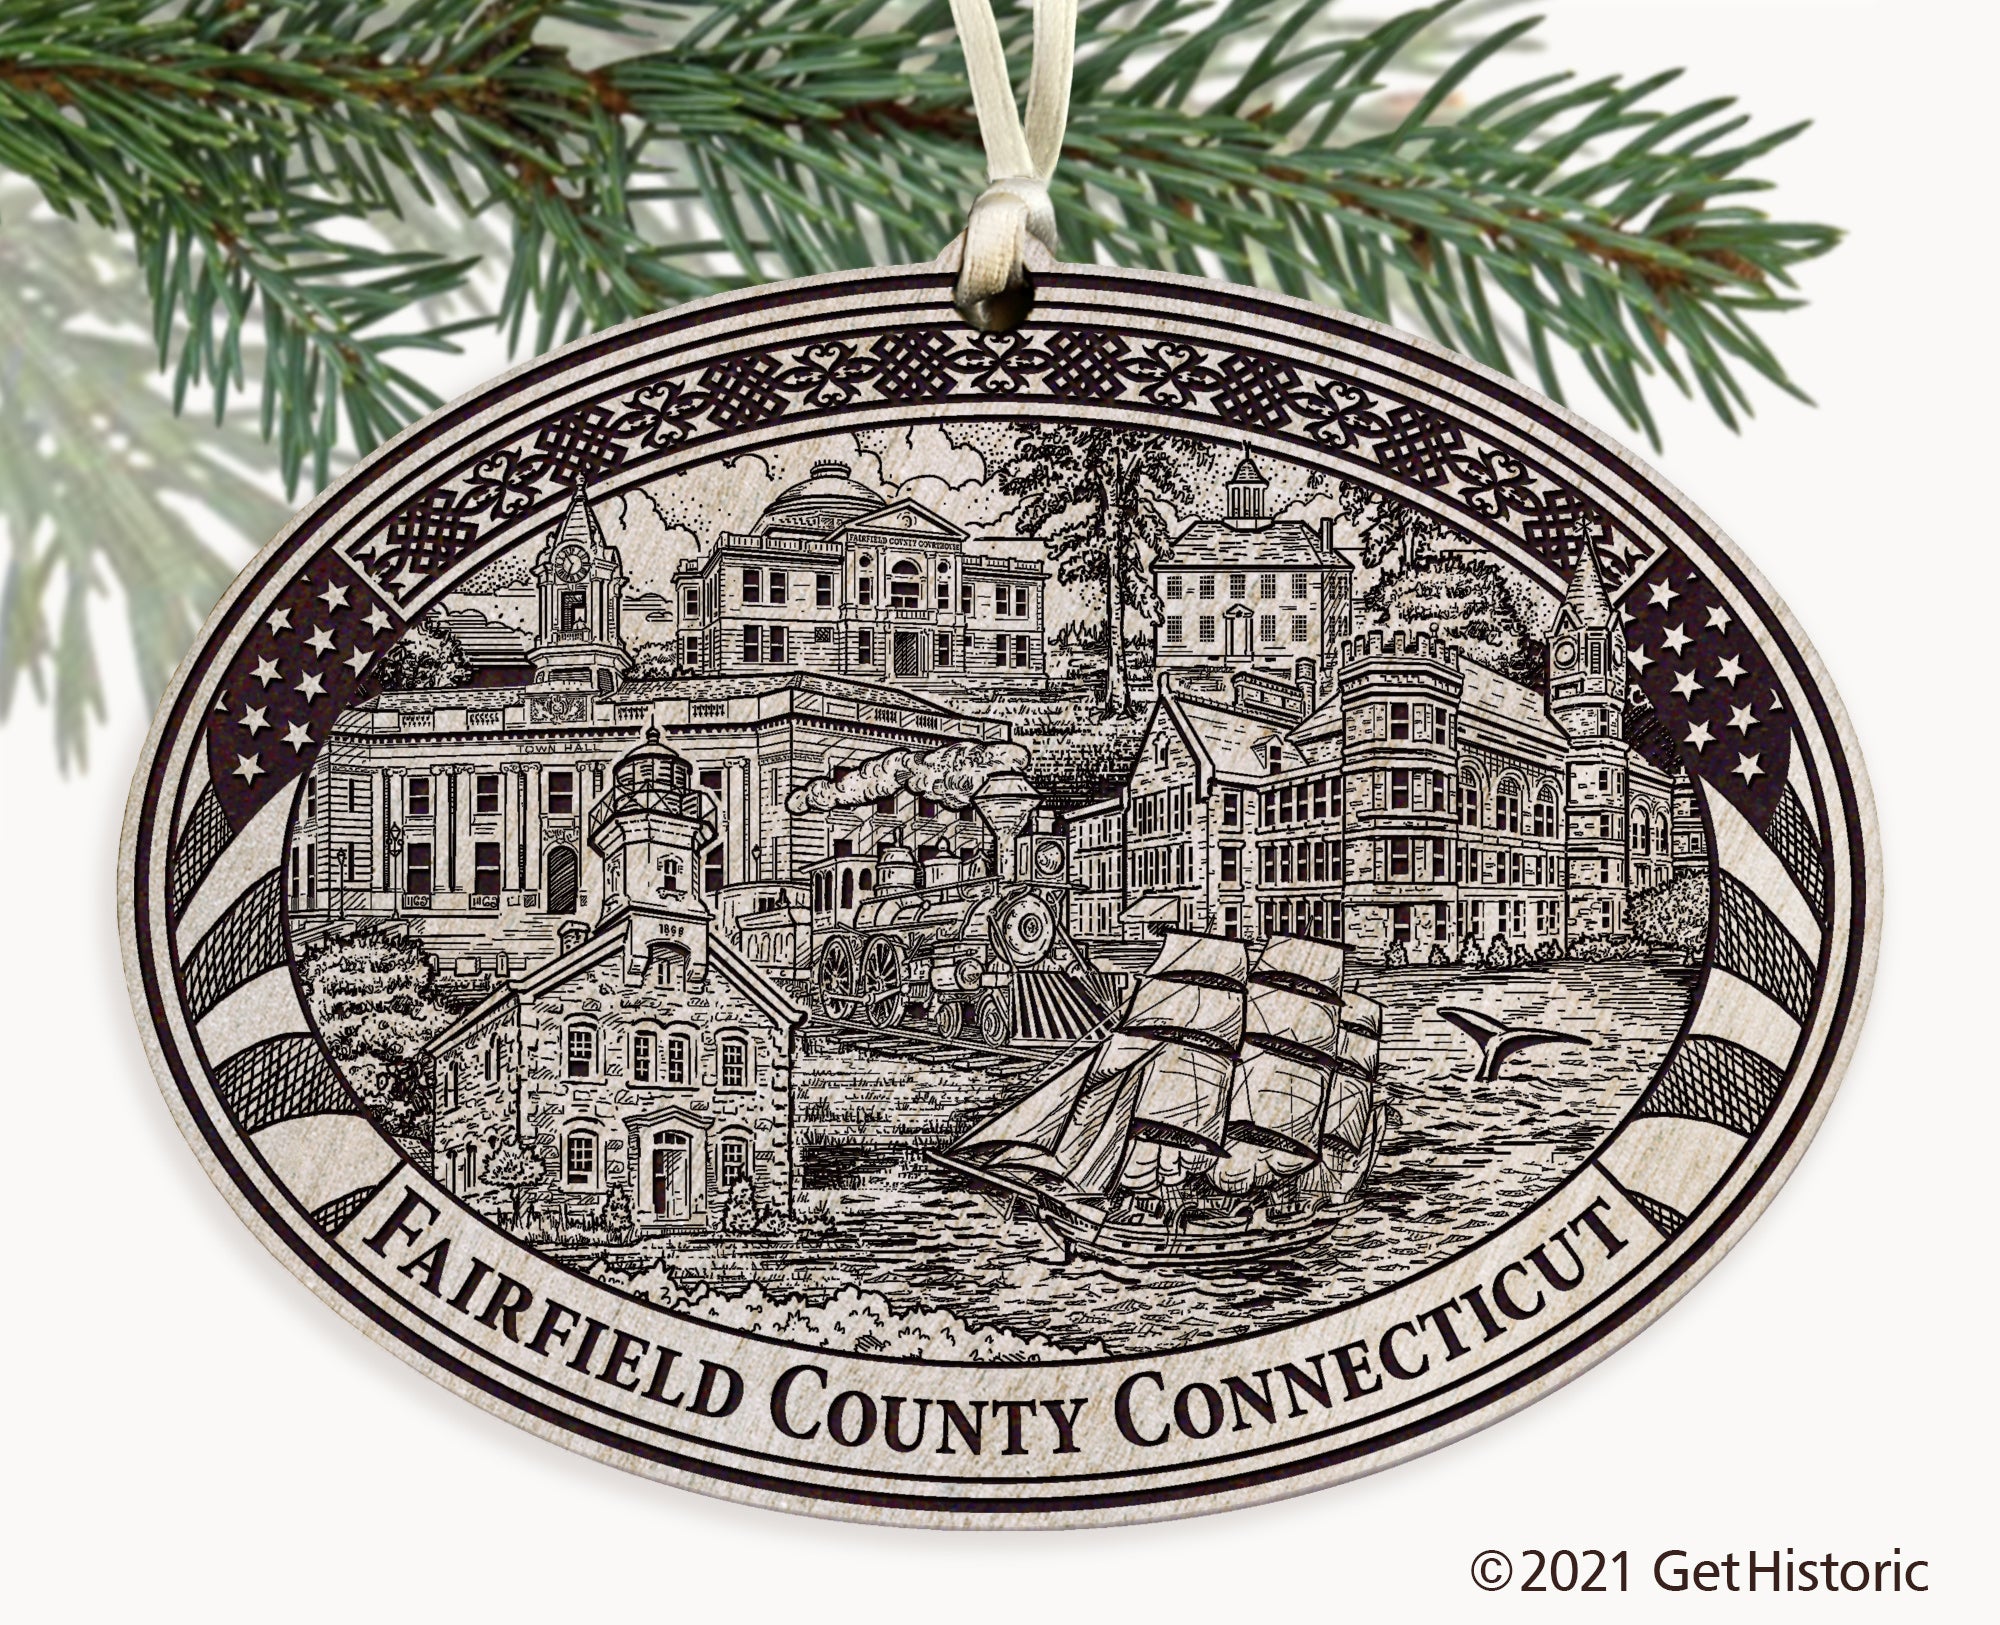 Fairfield County Connecticut Engraved Ornament